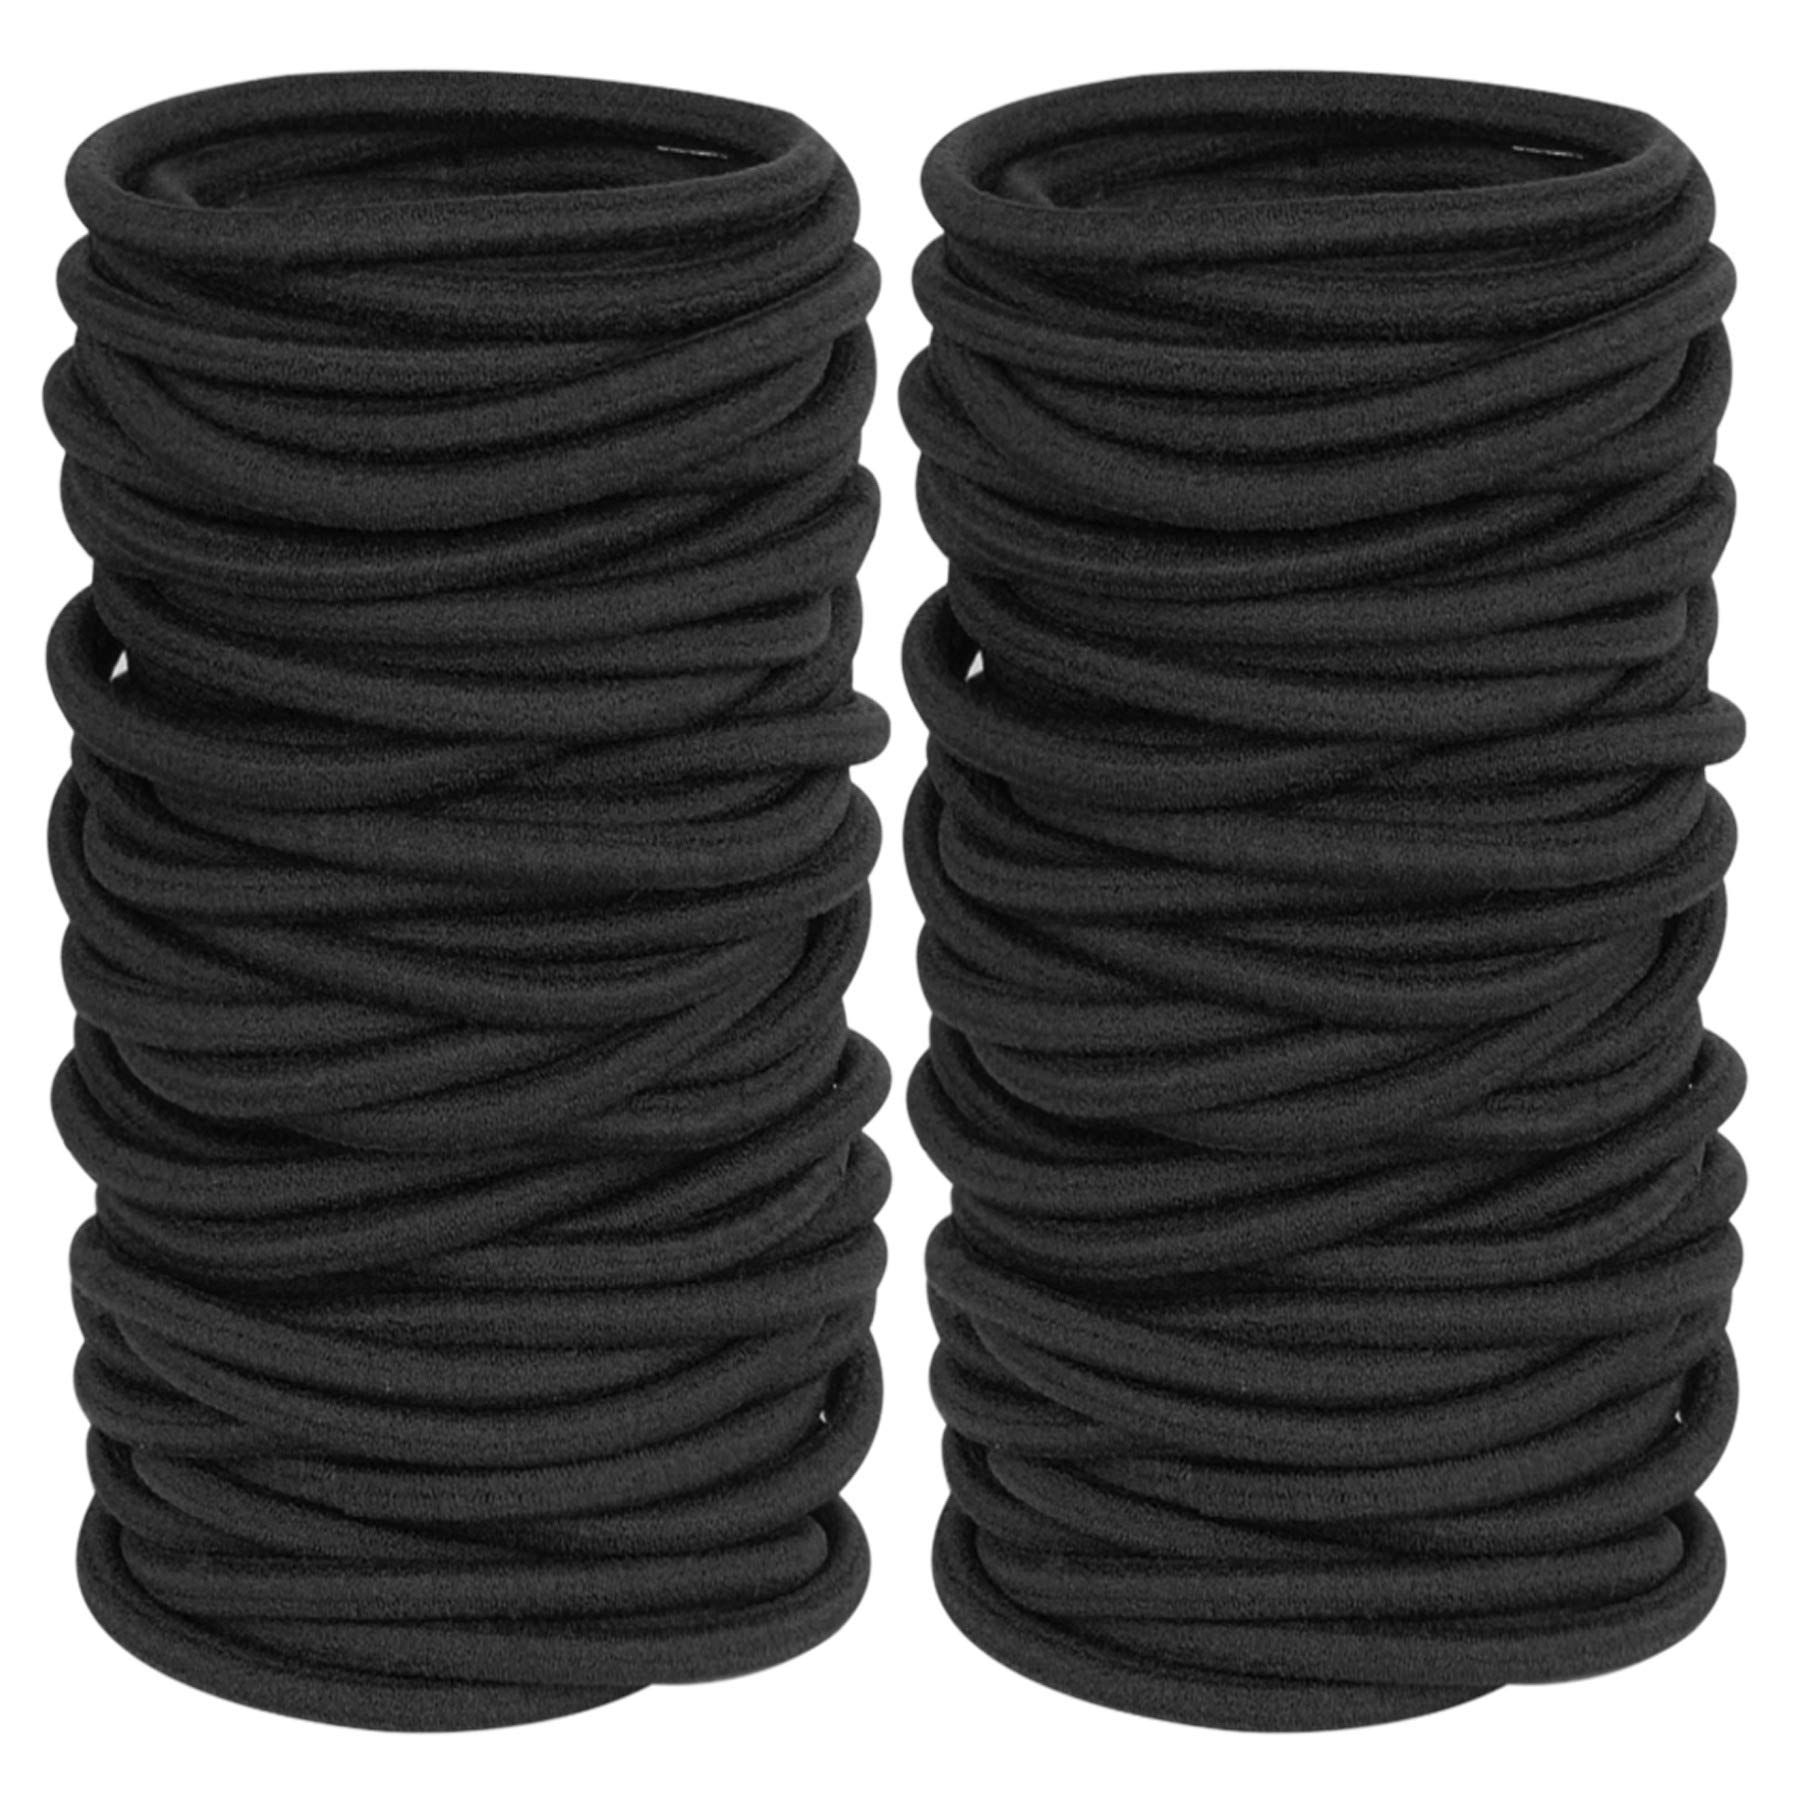 120 Pieces Black Hair Ties for Thick and Curly Hair Ponytail